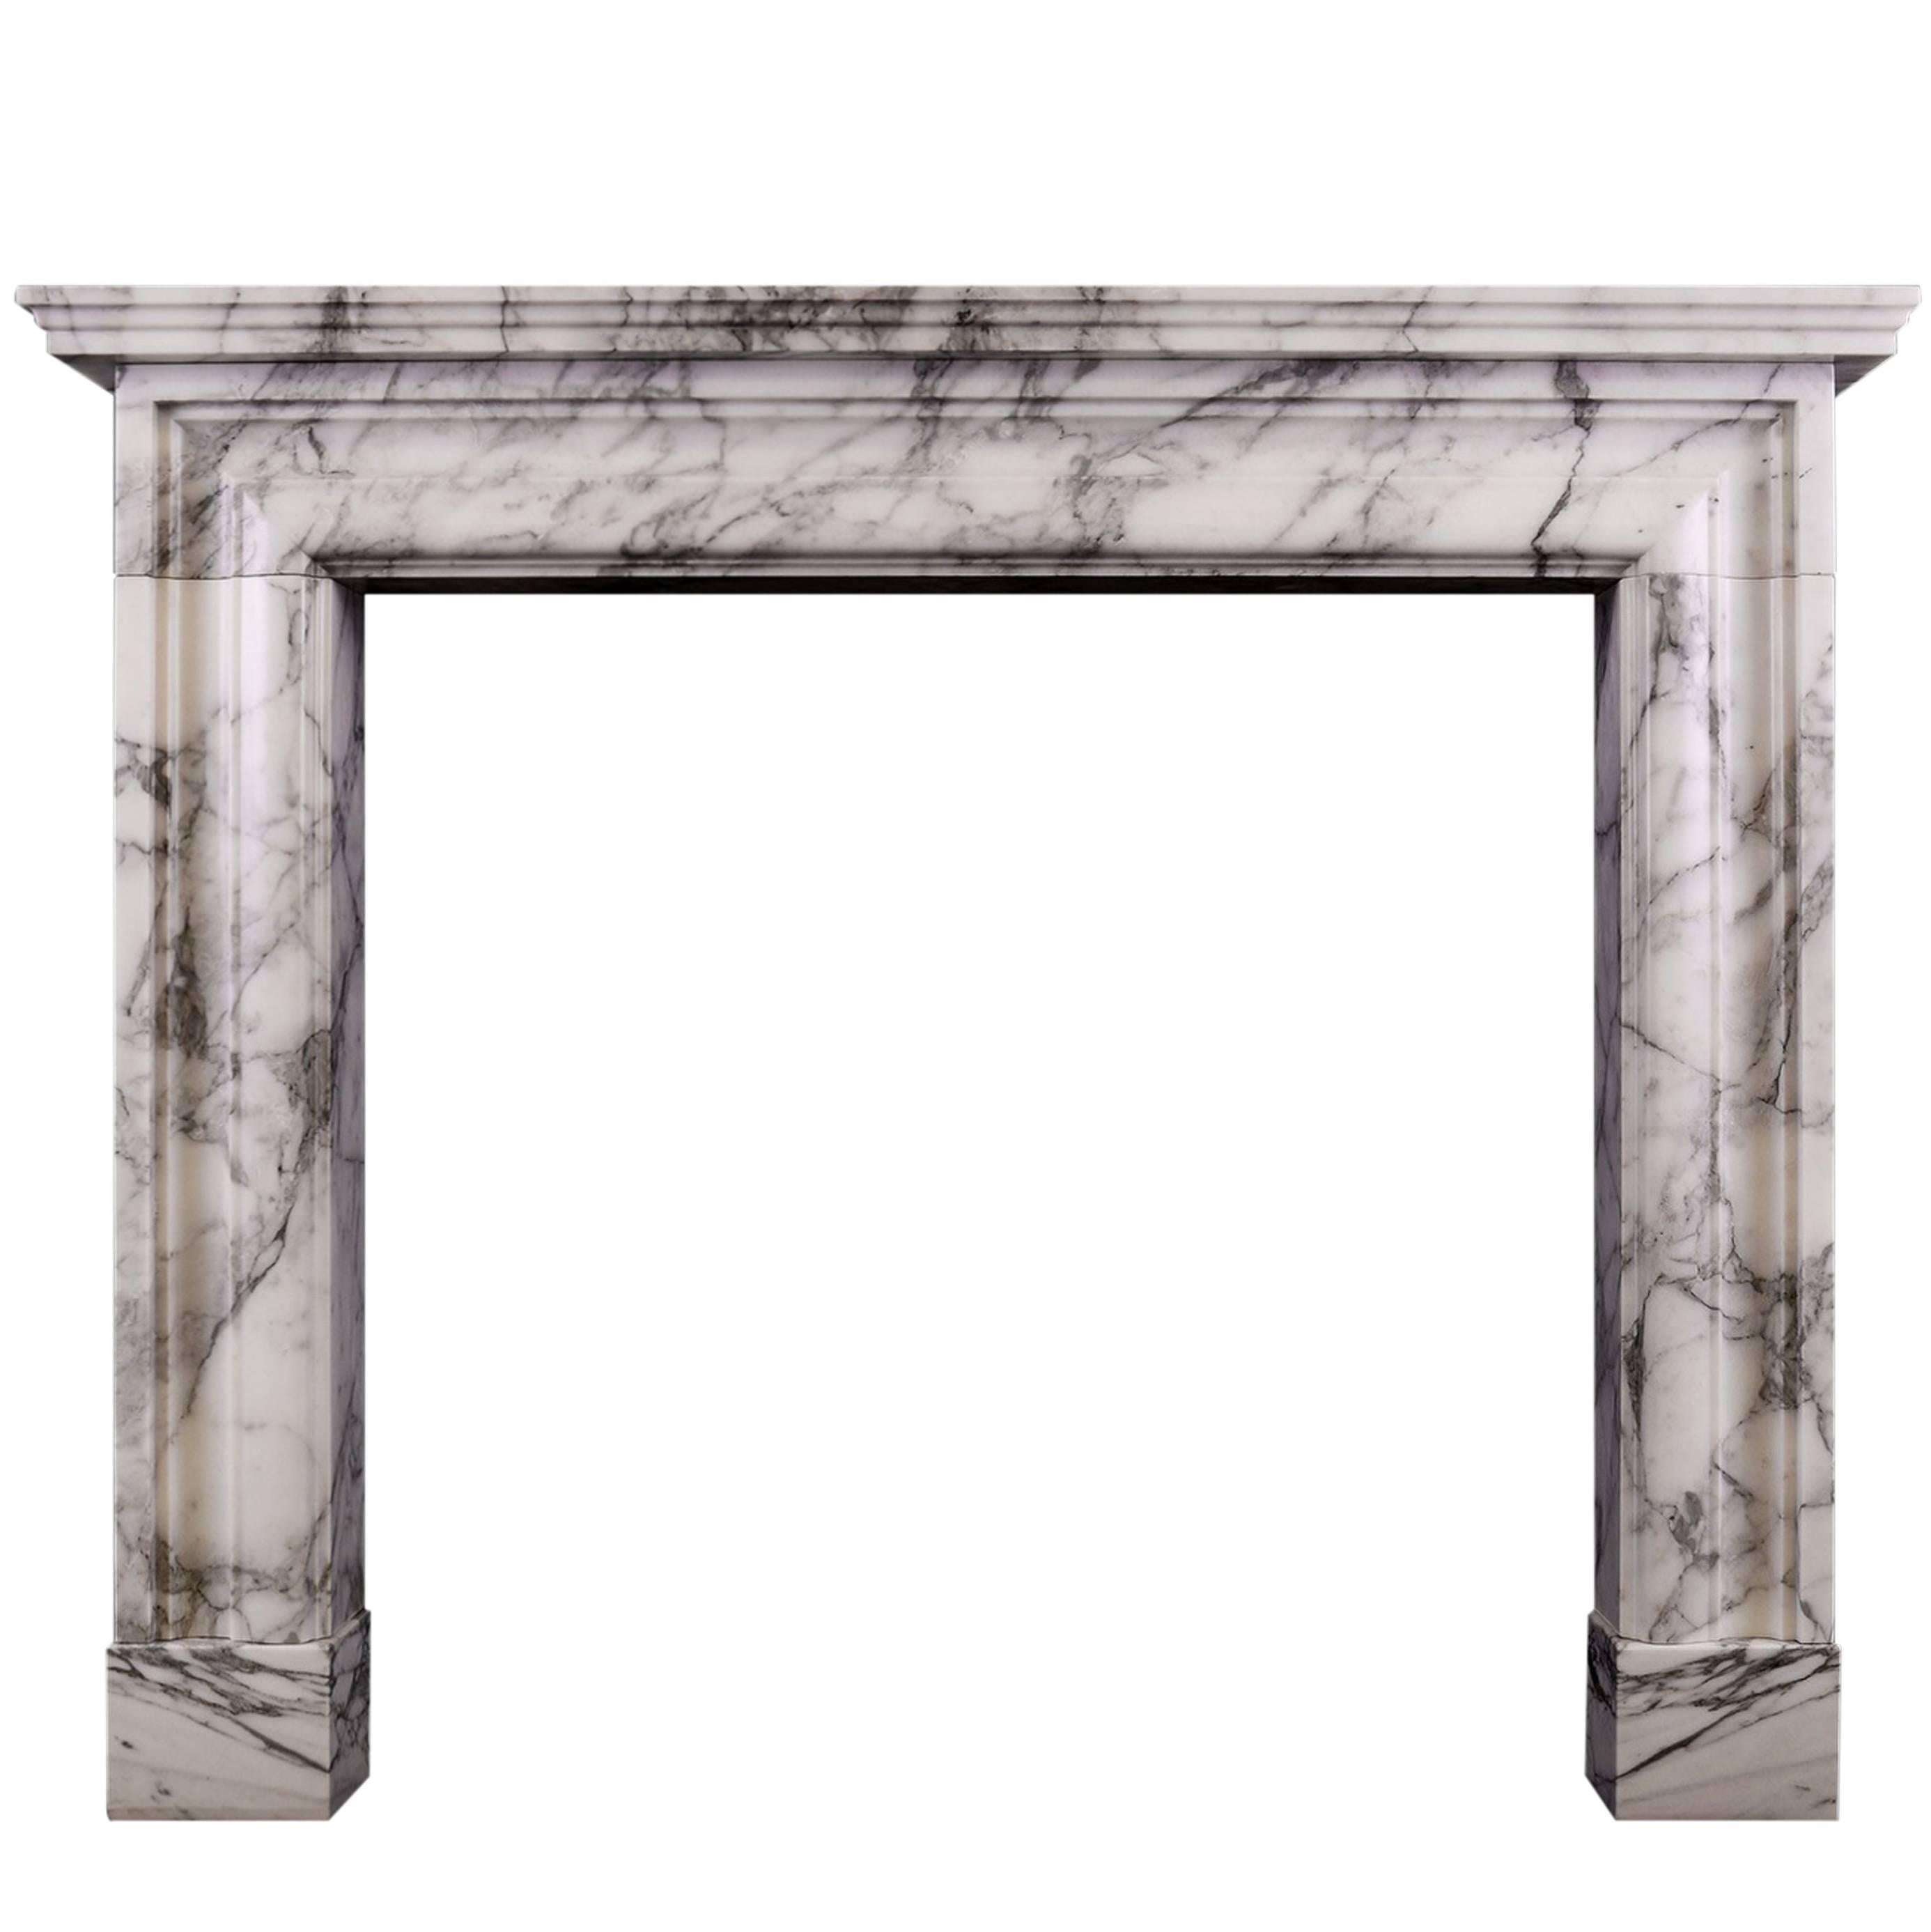 English Moulded Fireplace in Arabescato Marble